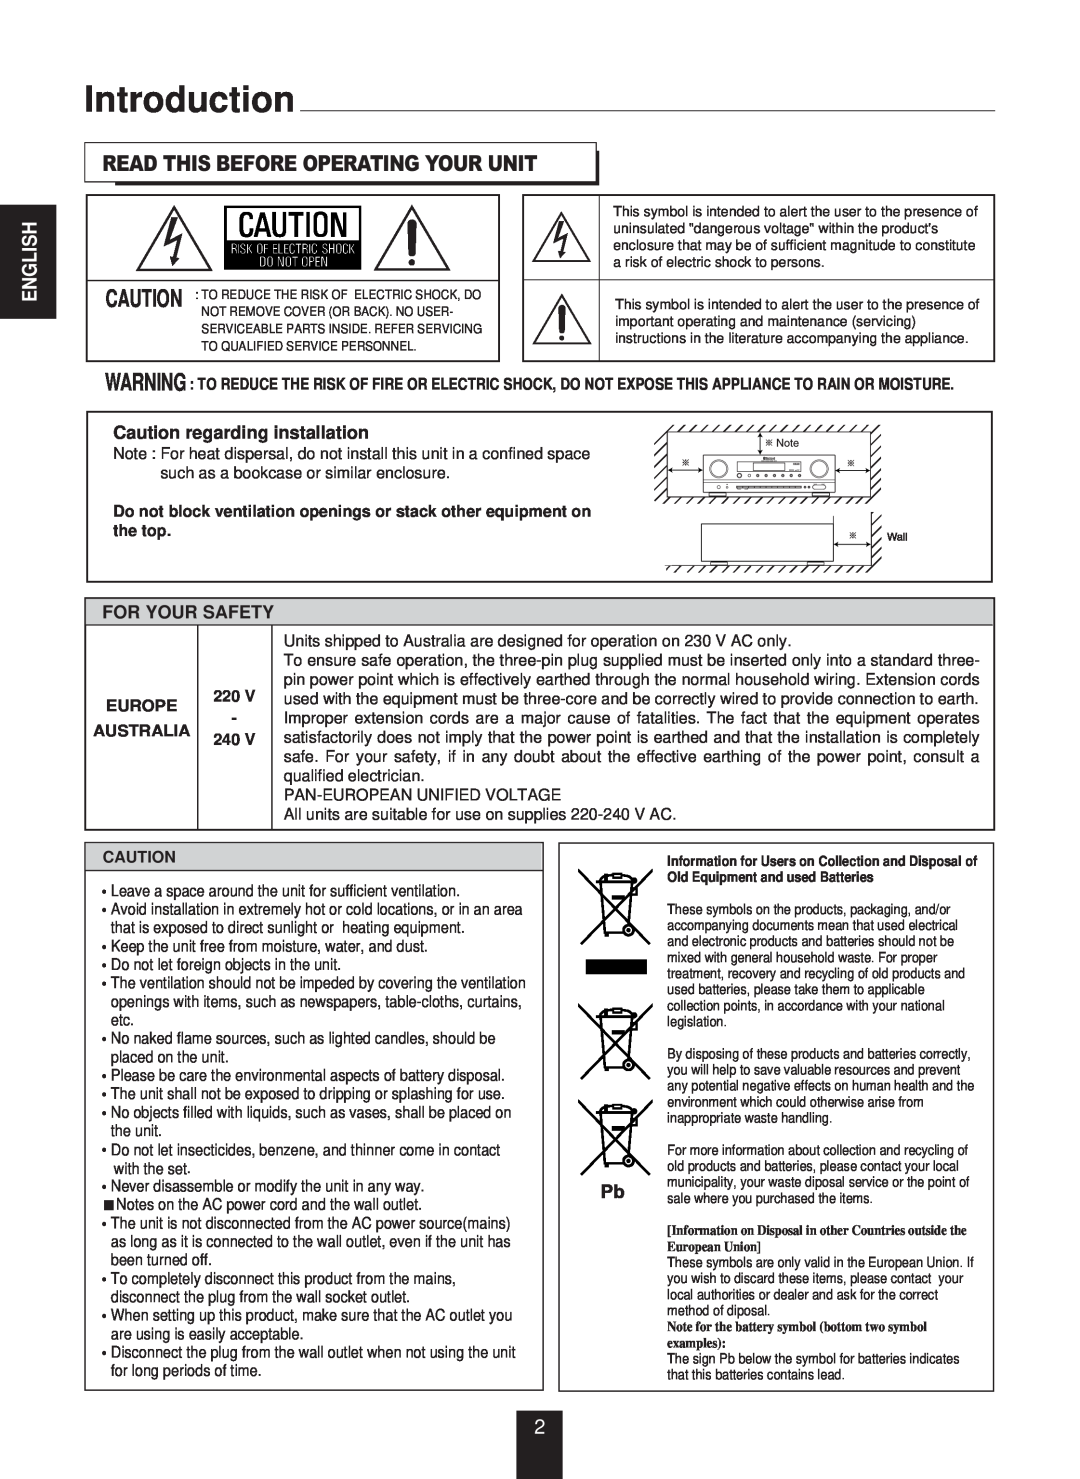 Sherwood RX-773 manual Read This Before Operating Your Unit, English, Caution regarding installation, For Your Safety 